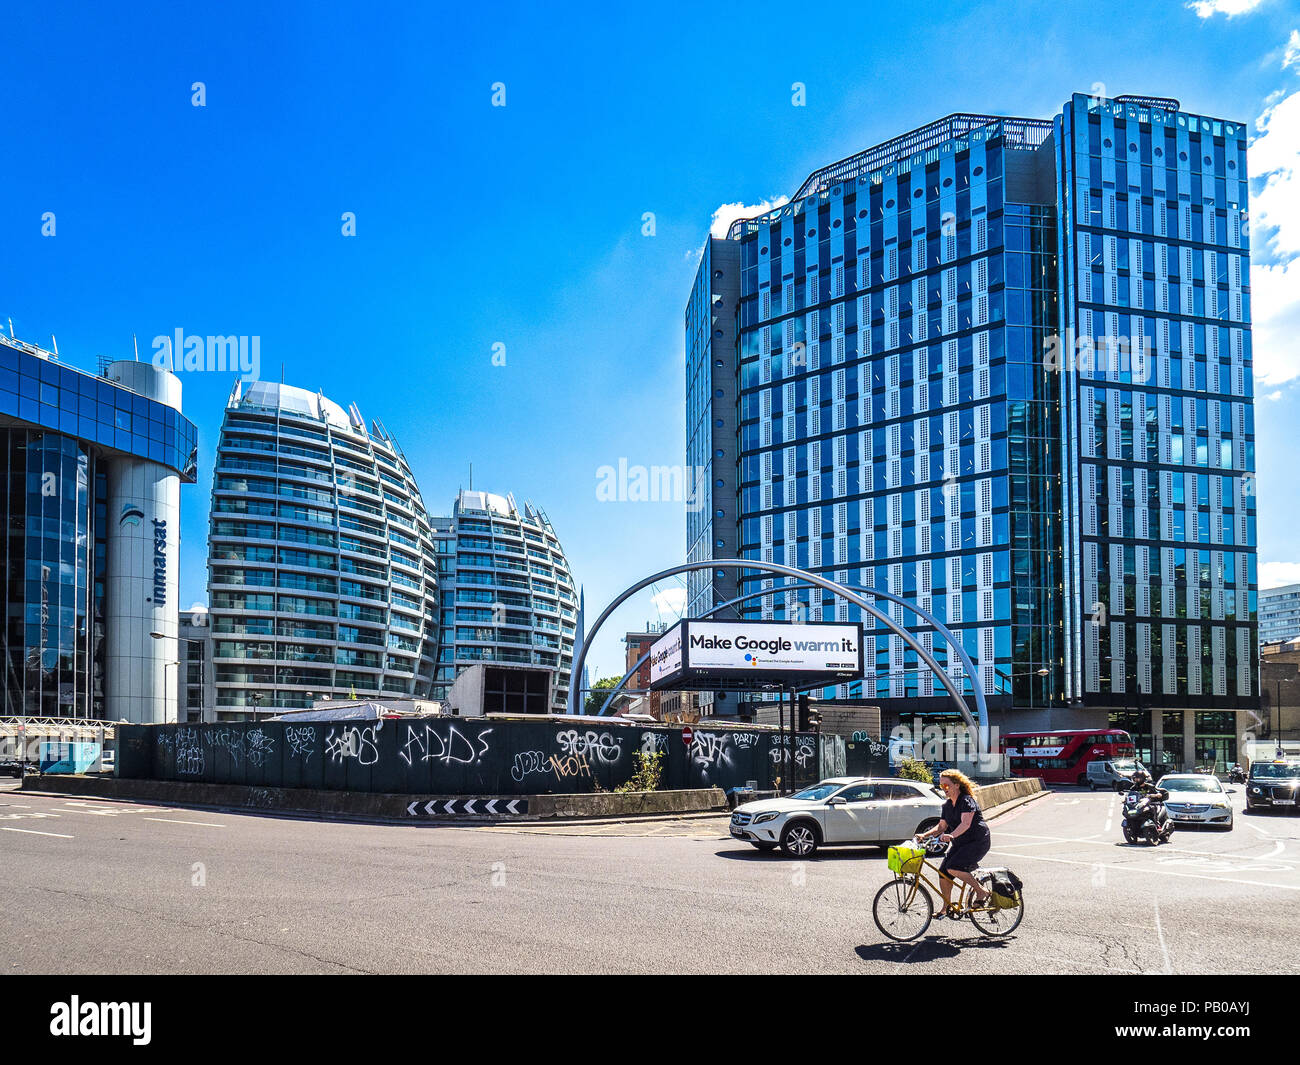 Silicon Roundabout or Old Street Roundabout -  London's tech hub area in central London Stock Photo